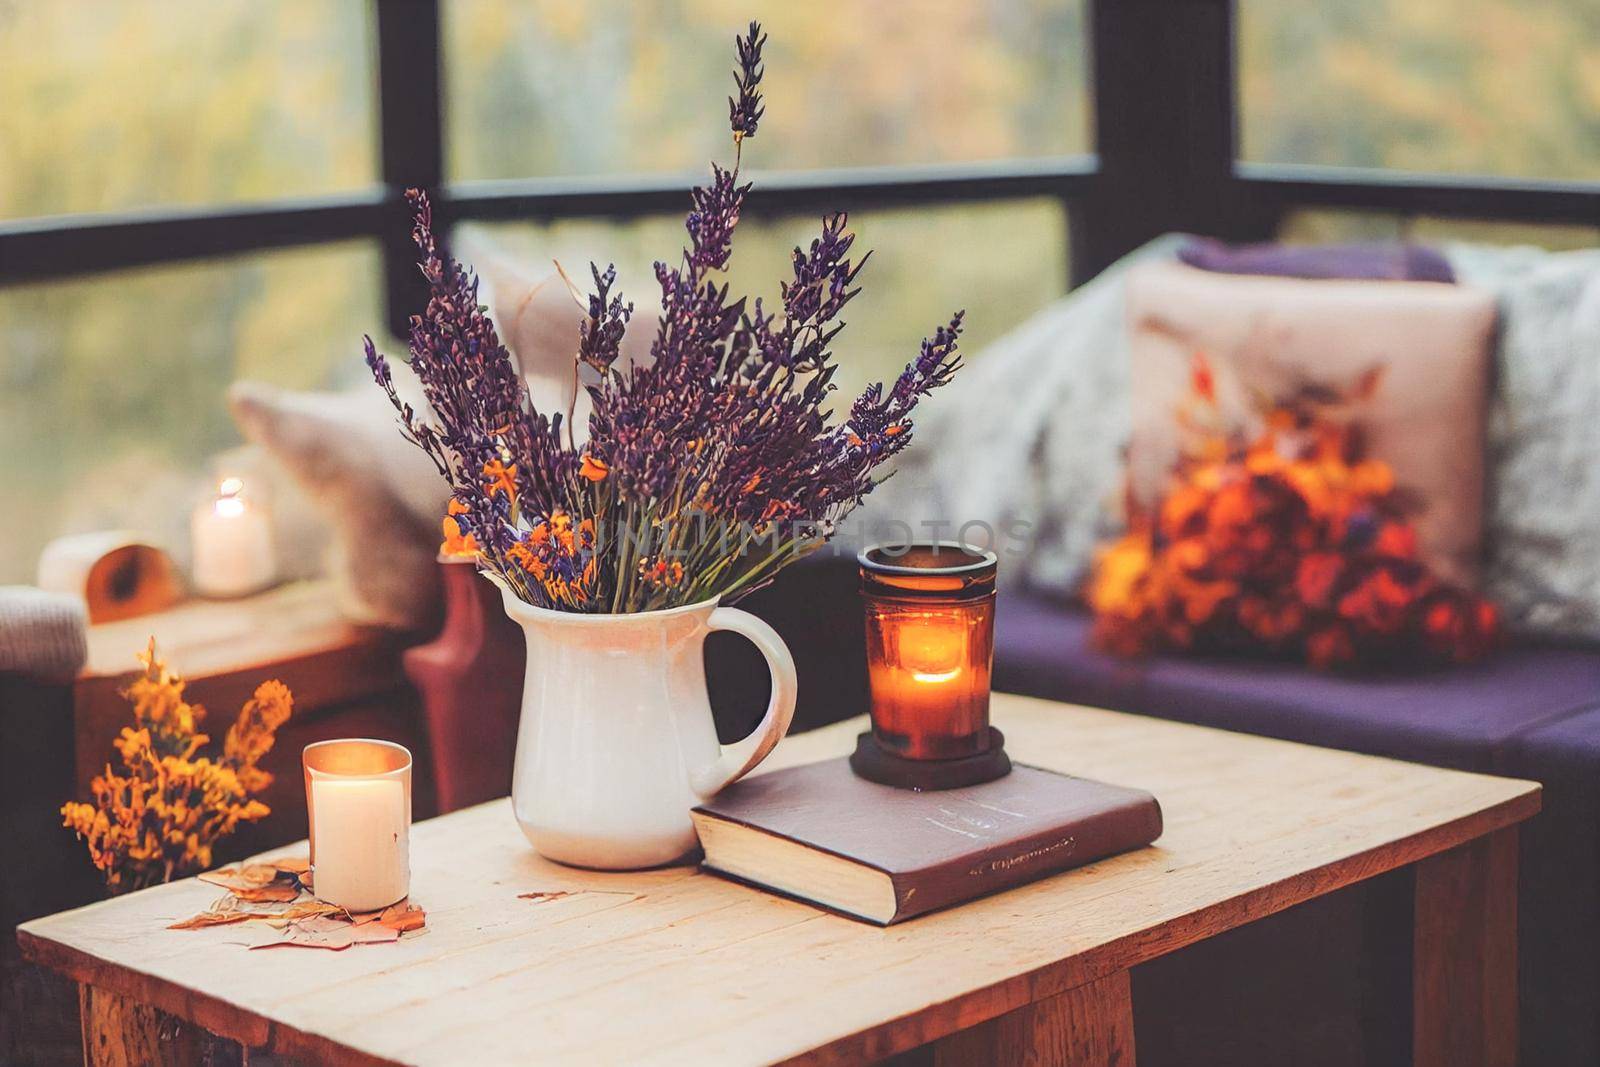 Autumn hygge home decor arrangement, concept of hygge and coziness, burning white fragrance candle by FokasuArt